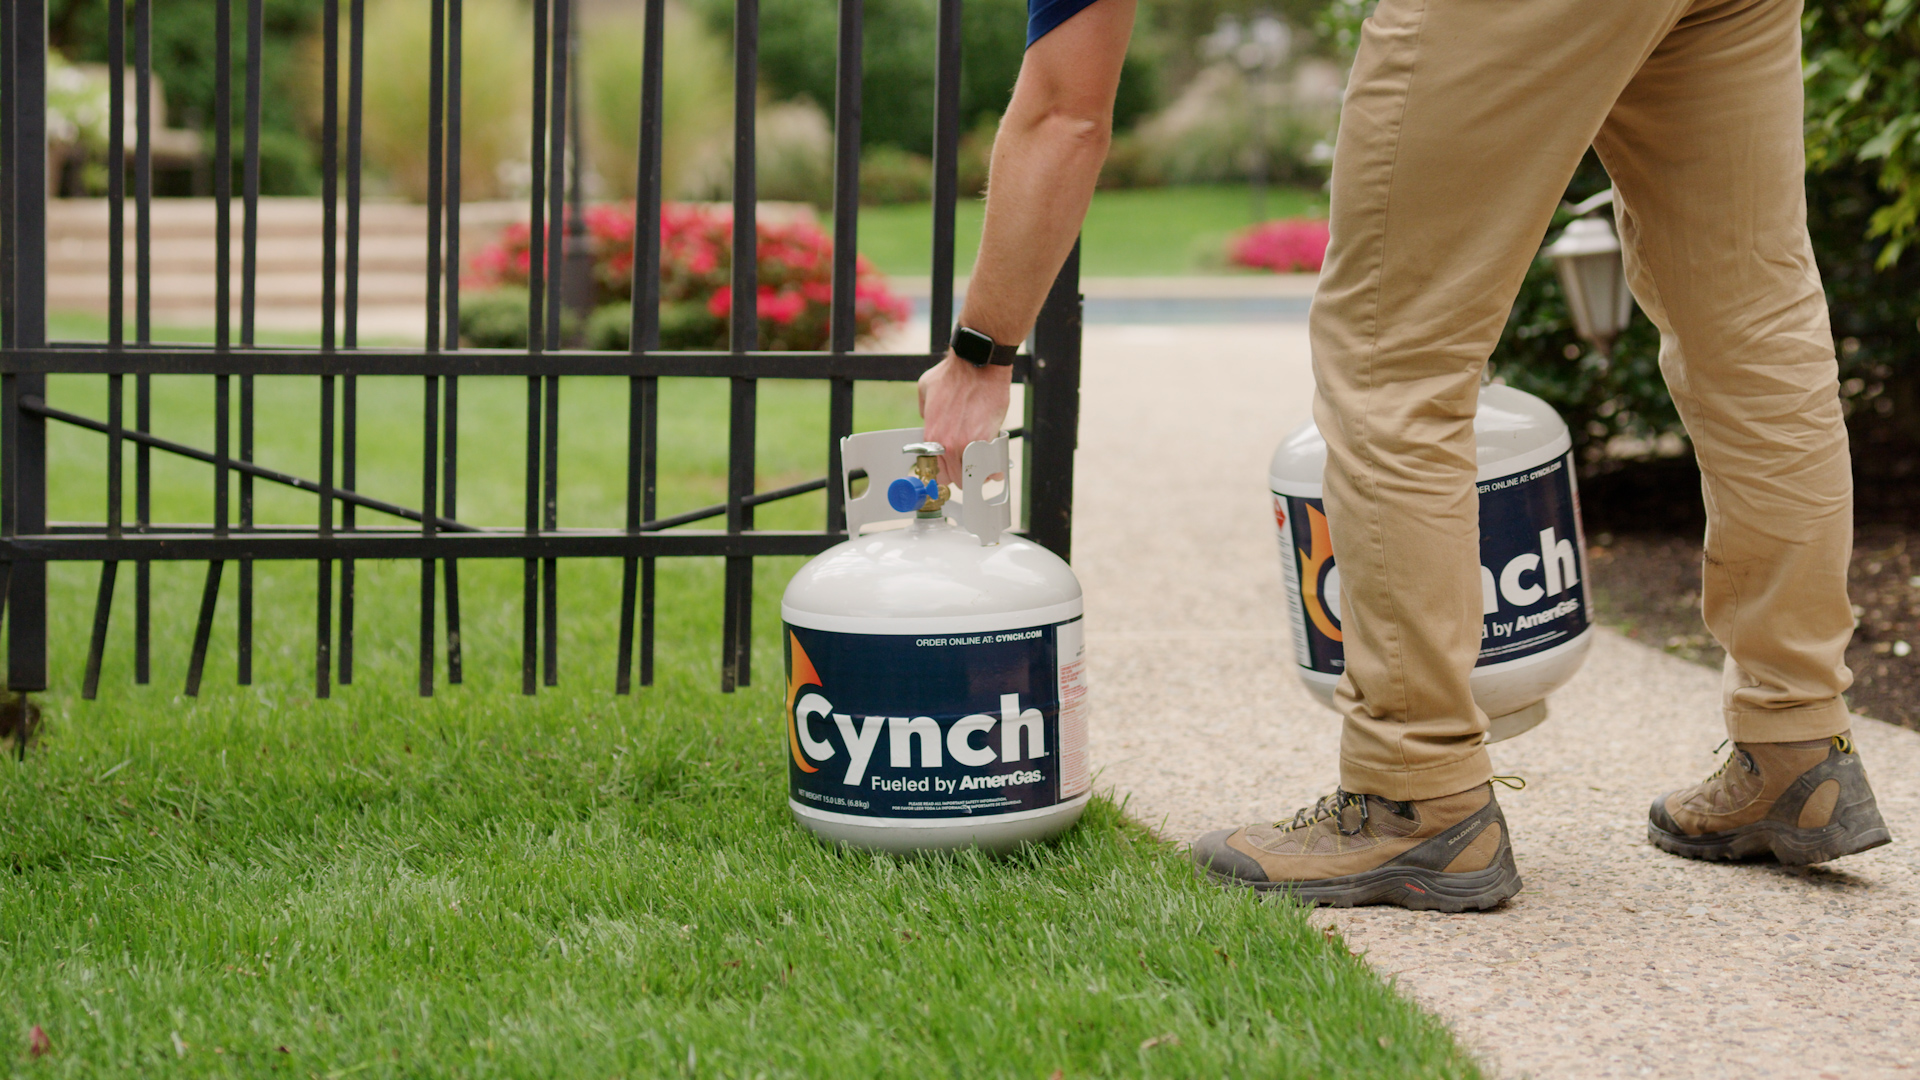 Person picking up Cynch branded portable propane tank